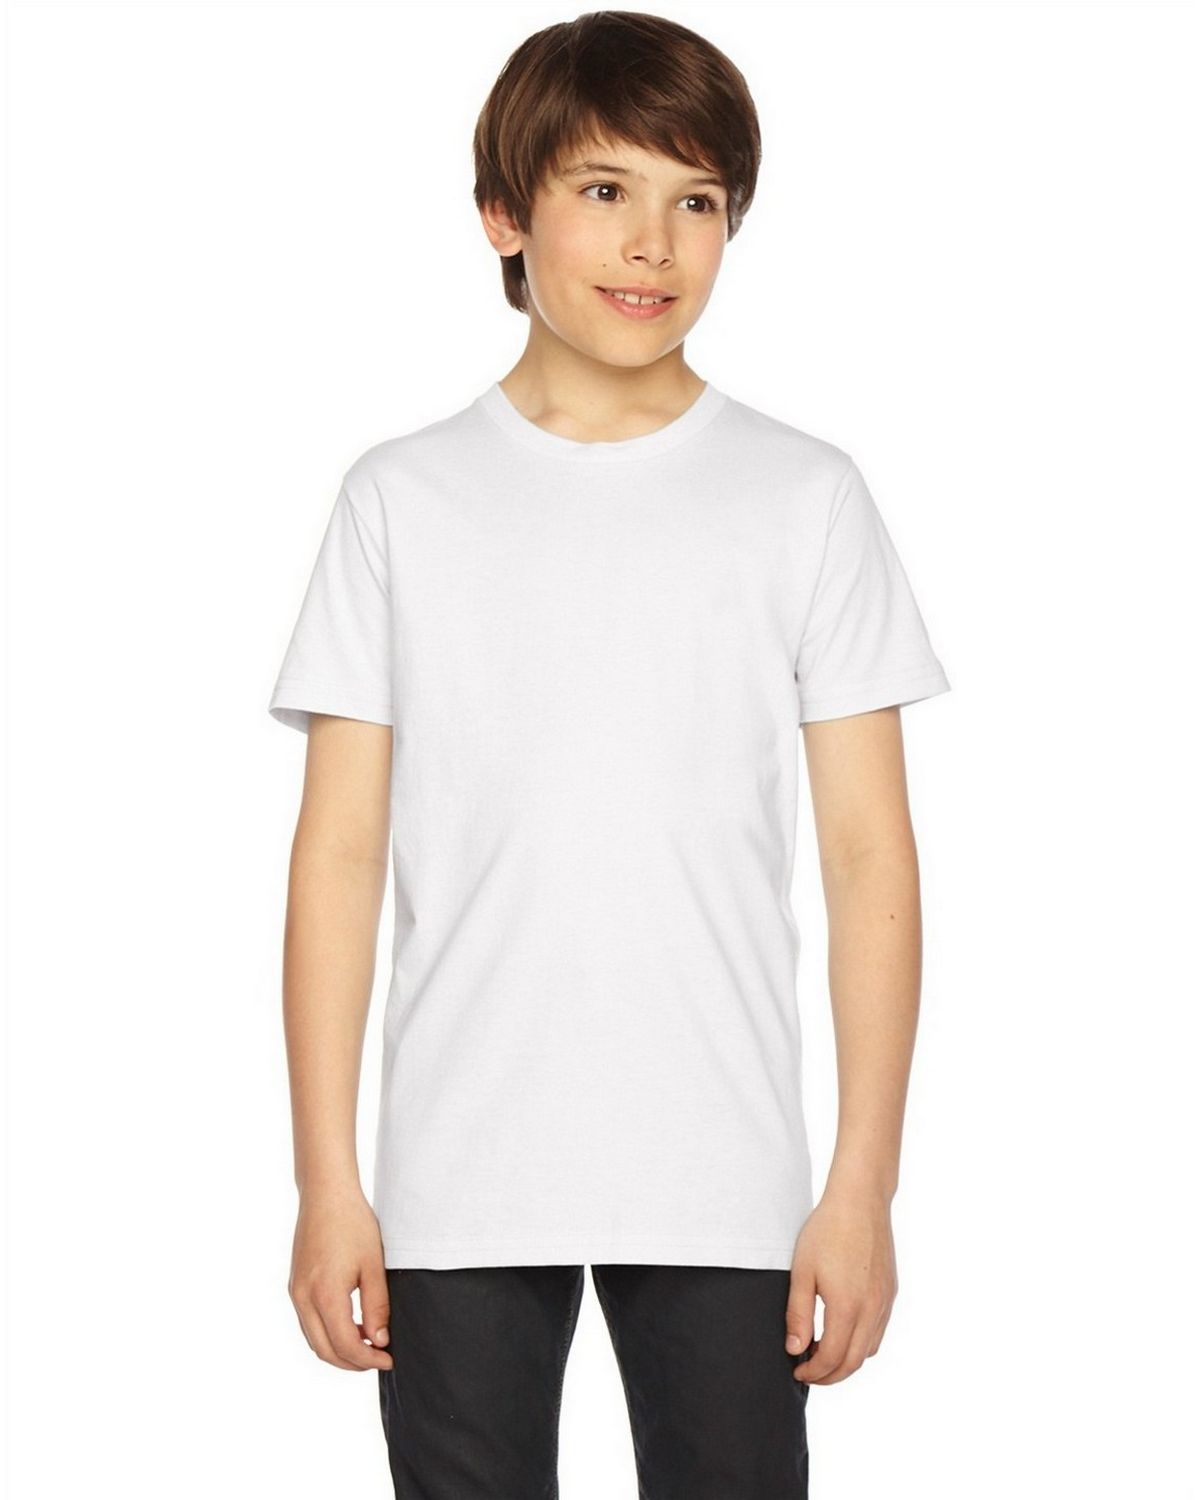 American Apparel Youth Size Chart